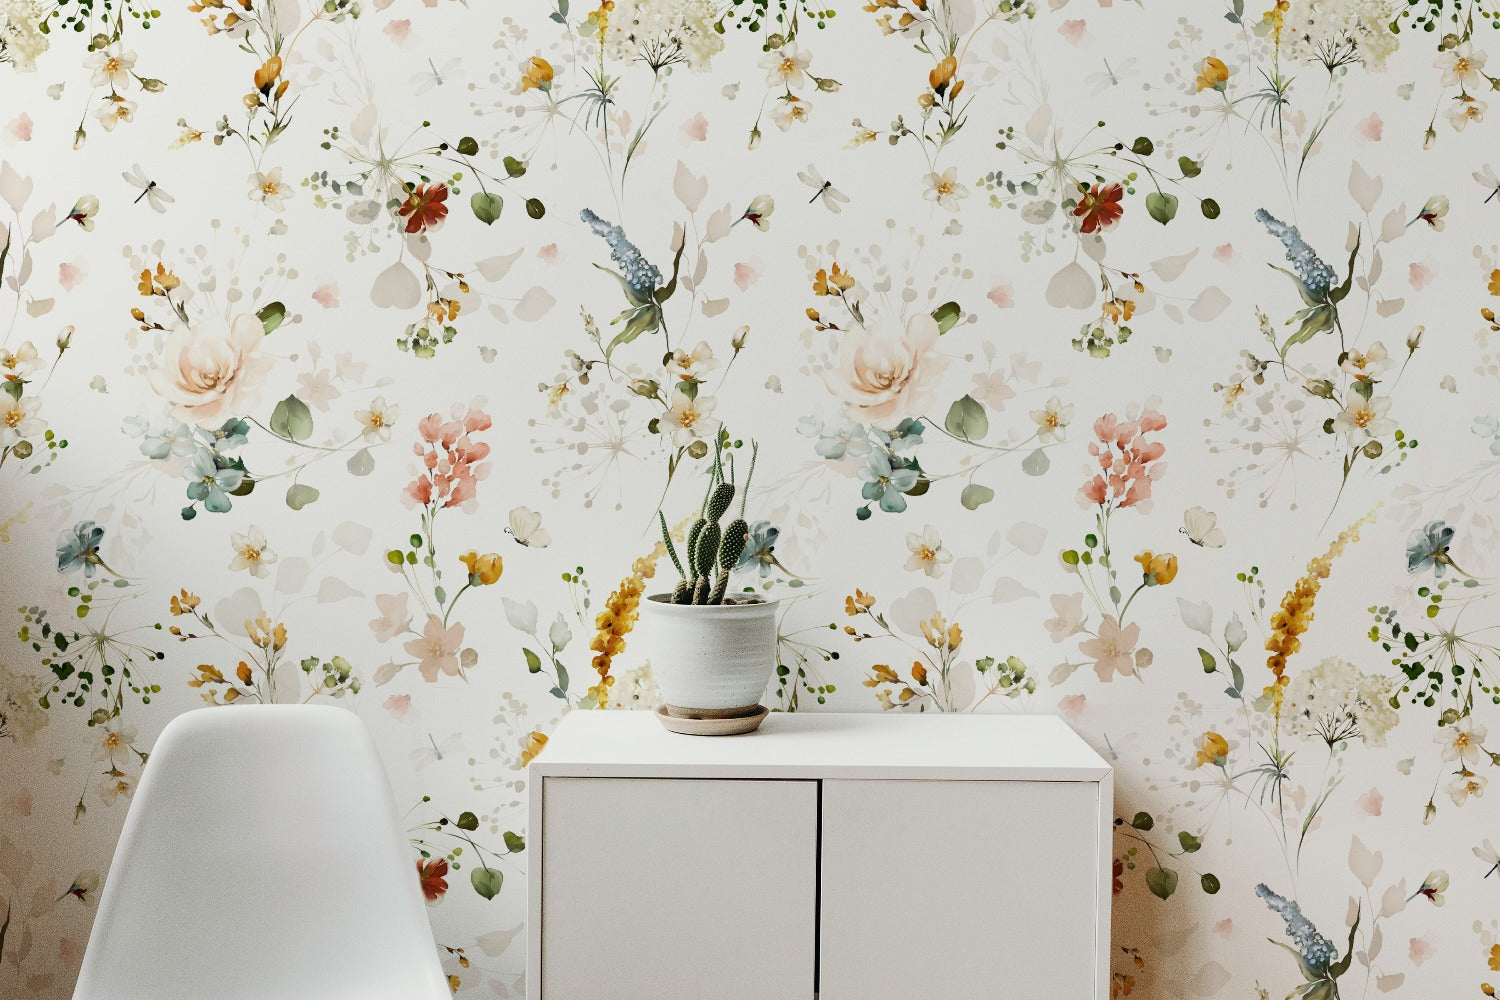 A cozy and modern corner with the Fiori Wallpaper serving as a backdrop for a minimalist workspace, where the pastel floral print complements a sleek white desk and a modern chair, enhancing the room's charm and warmth